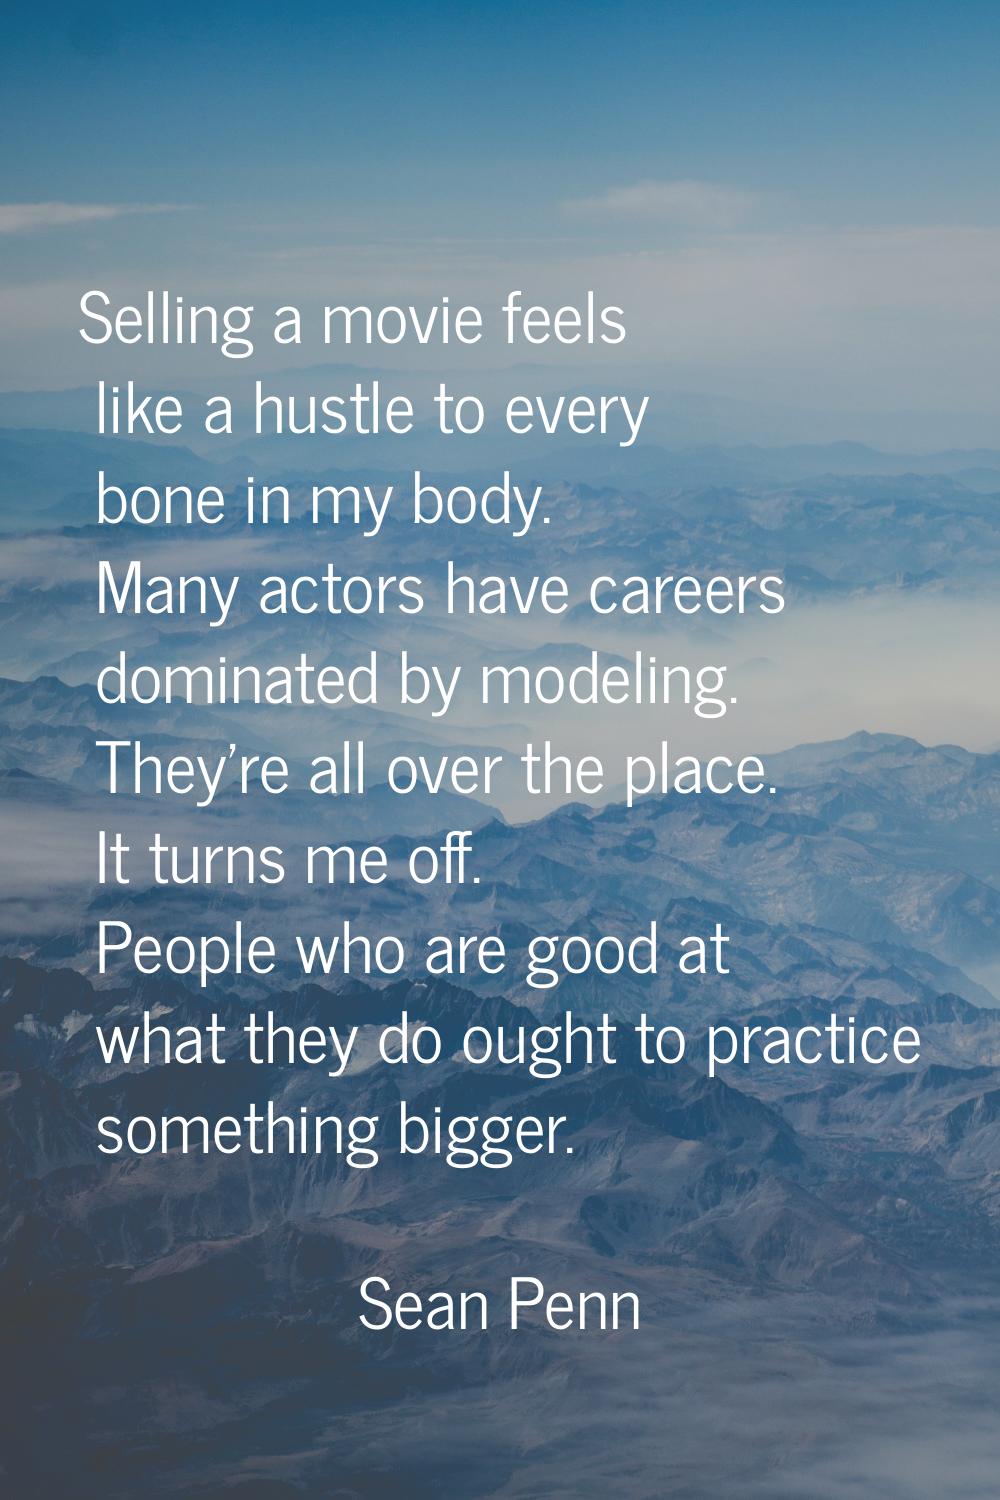 Selling a movie feels like a hustle to every bone in my body. Many actors have careers dominated by